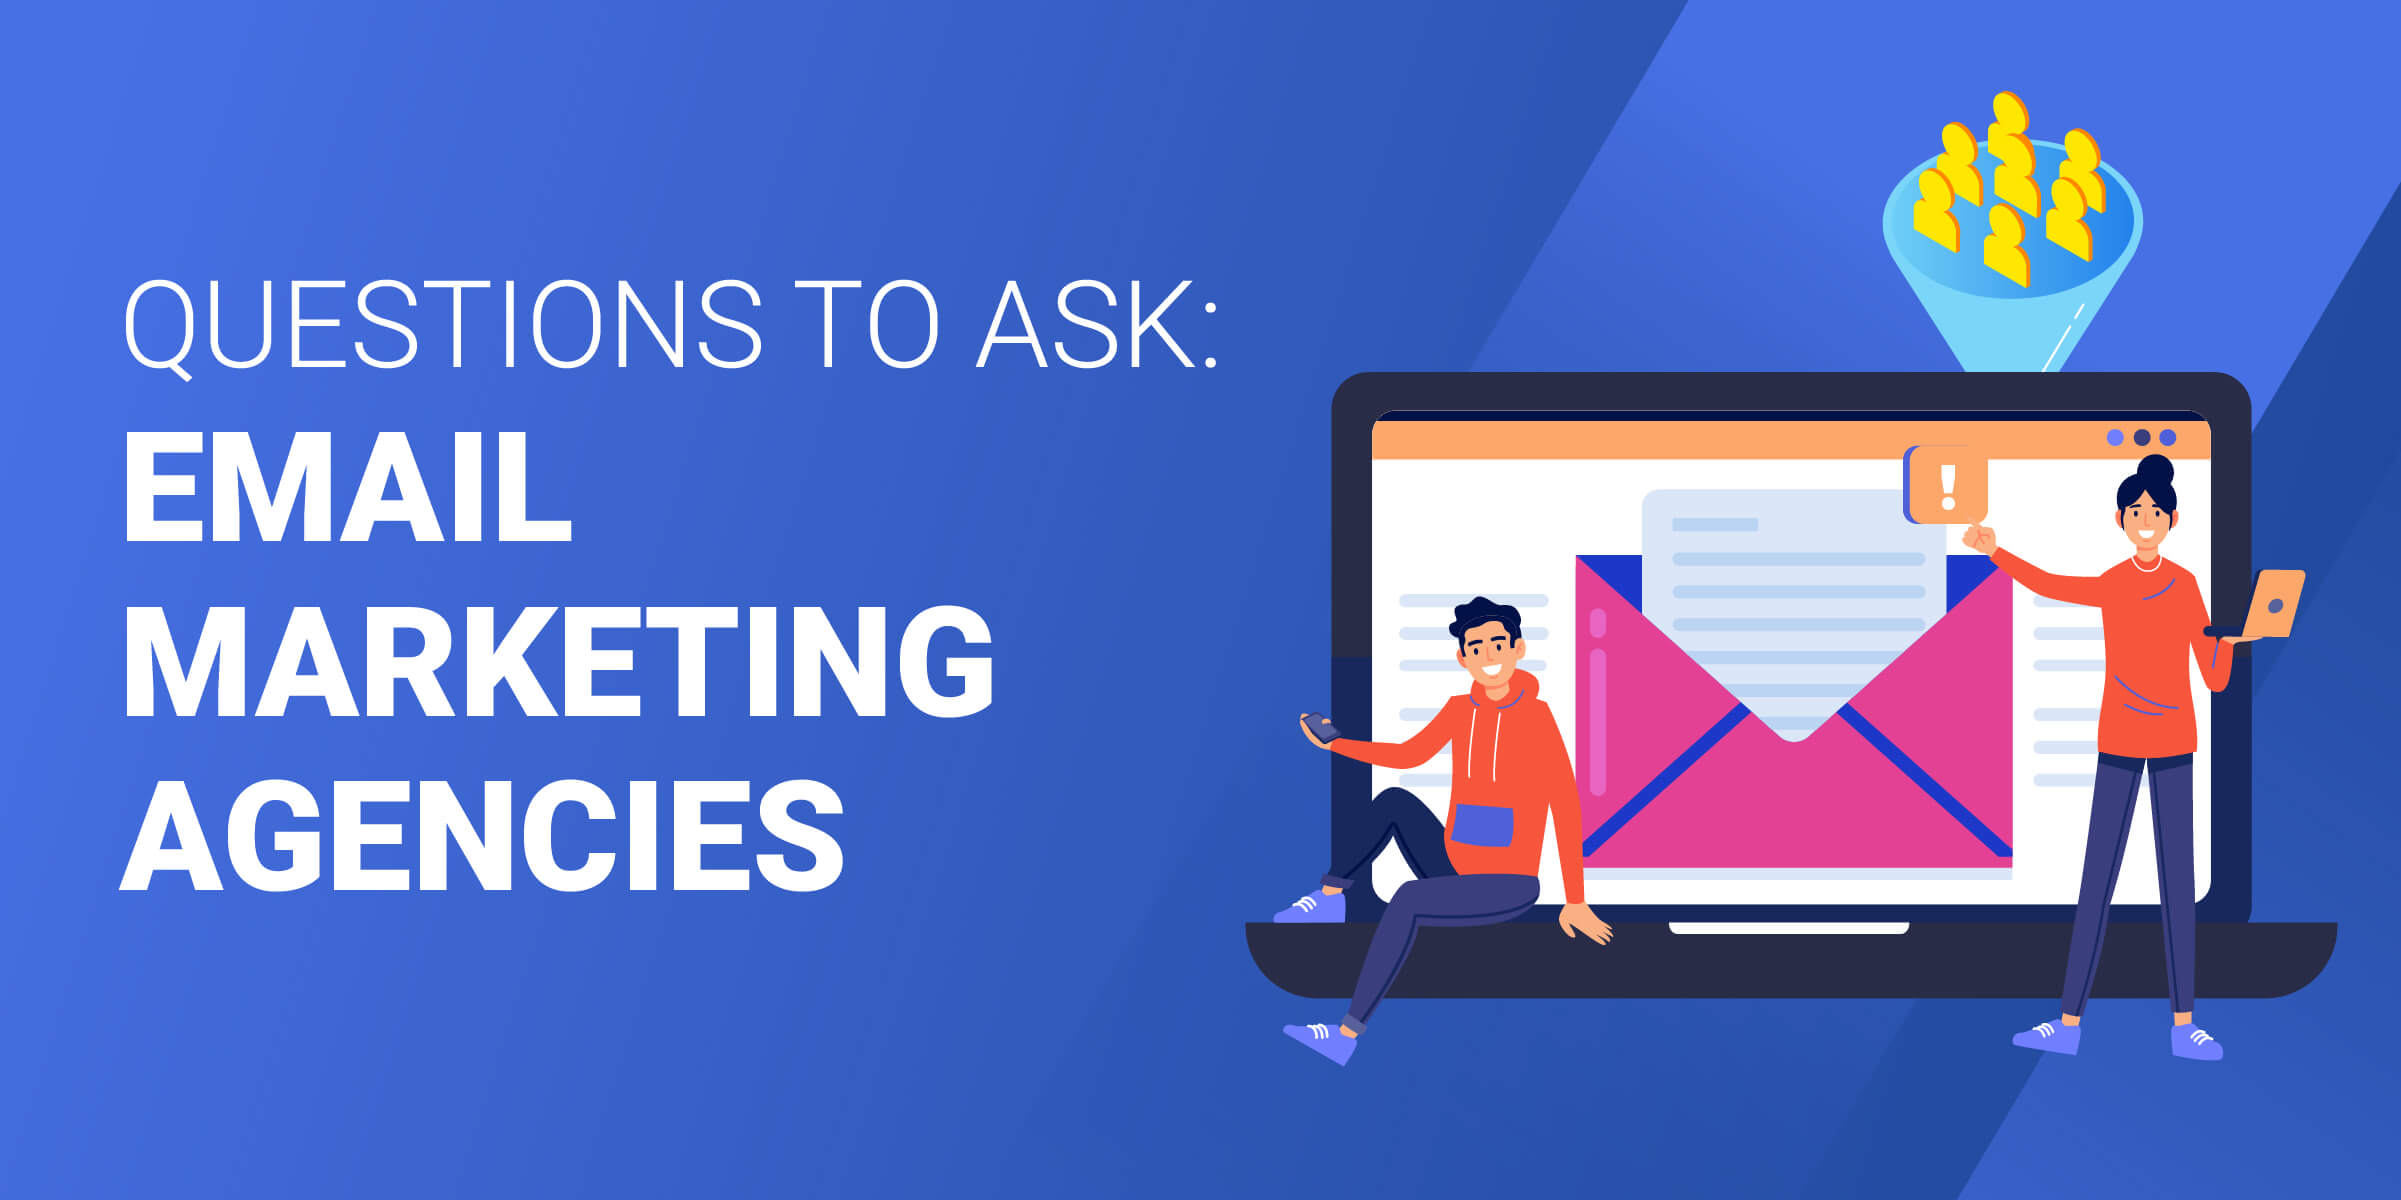 Questions to Ask Email Marketing Agencies